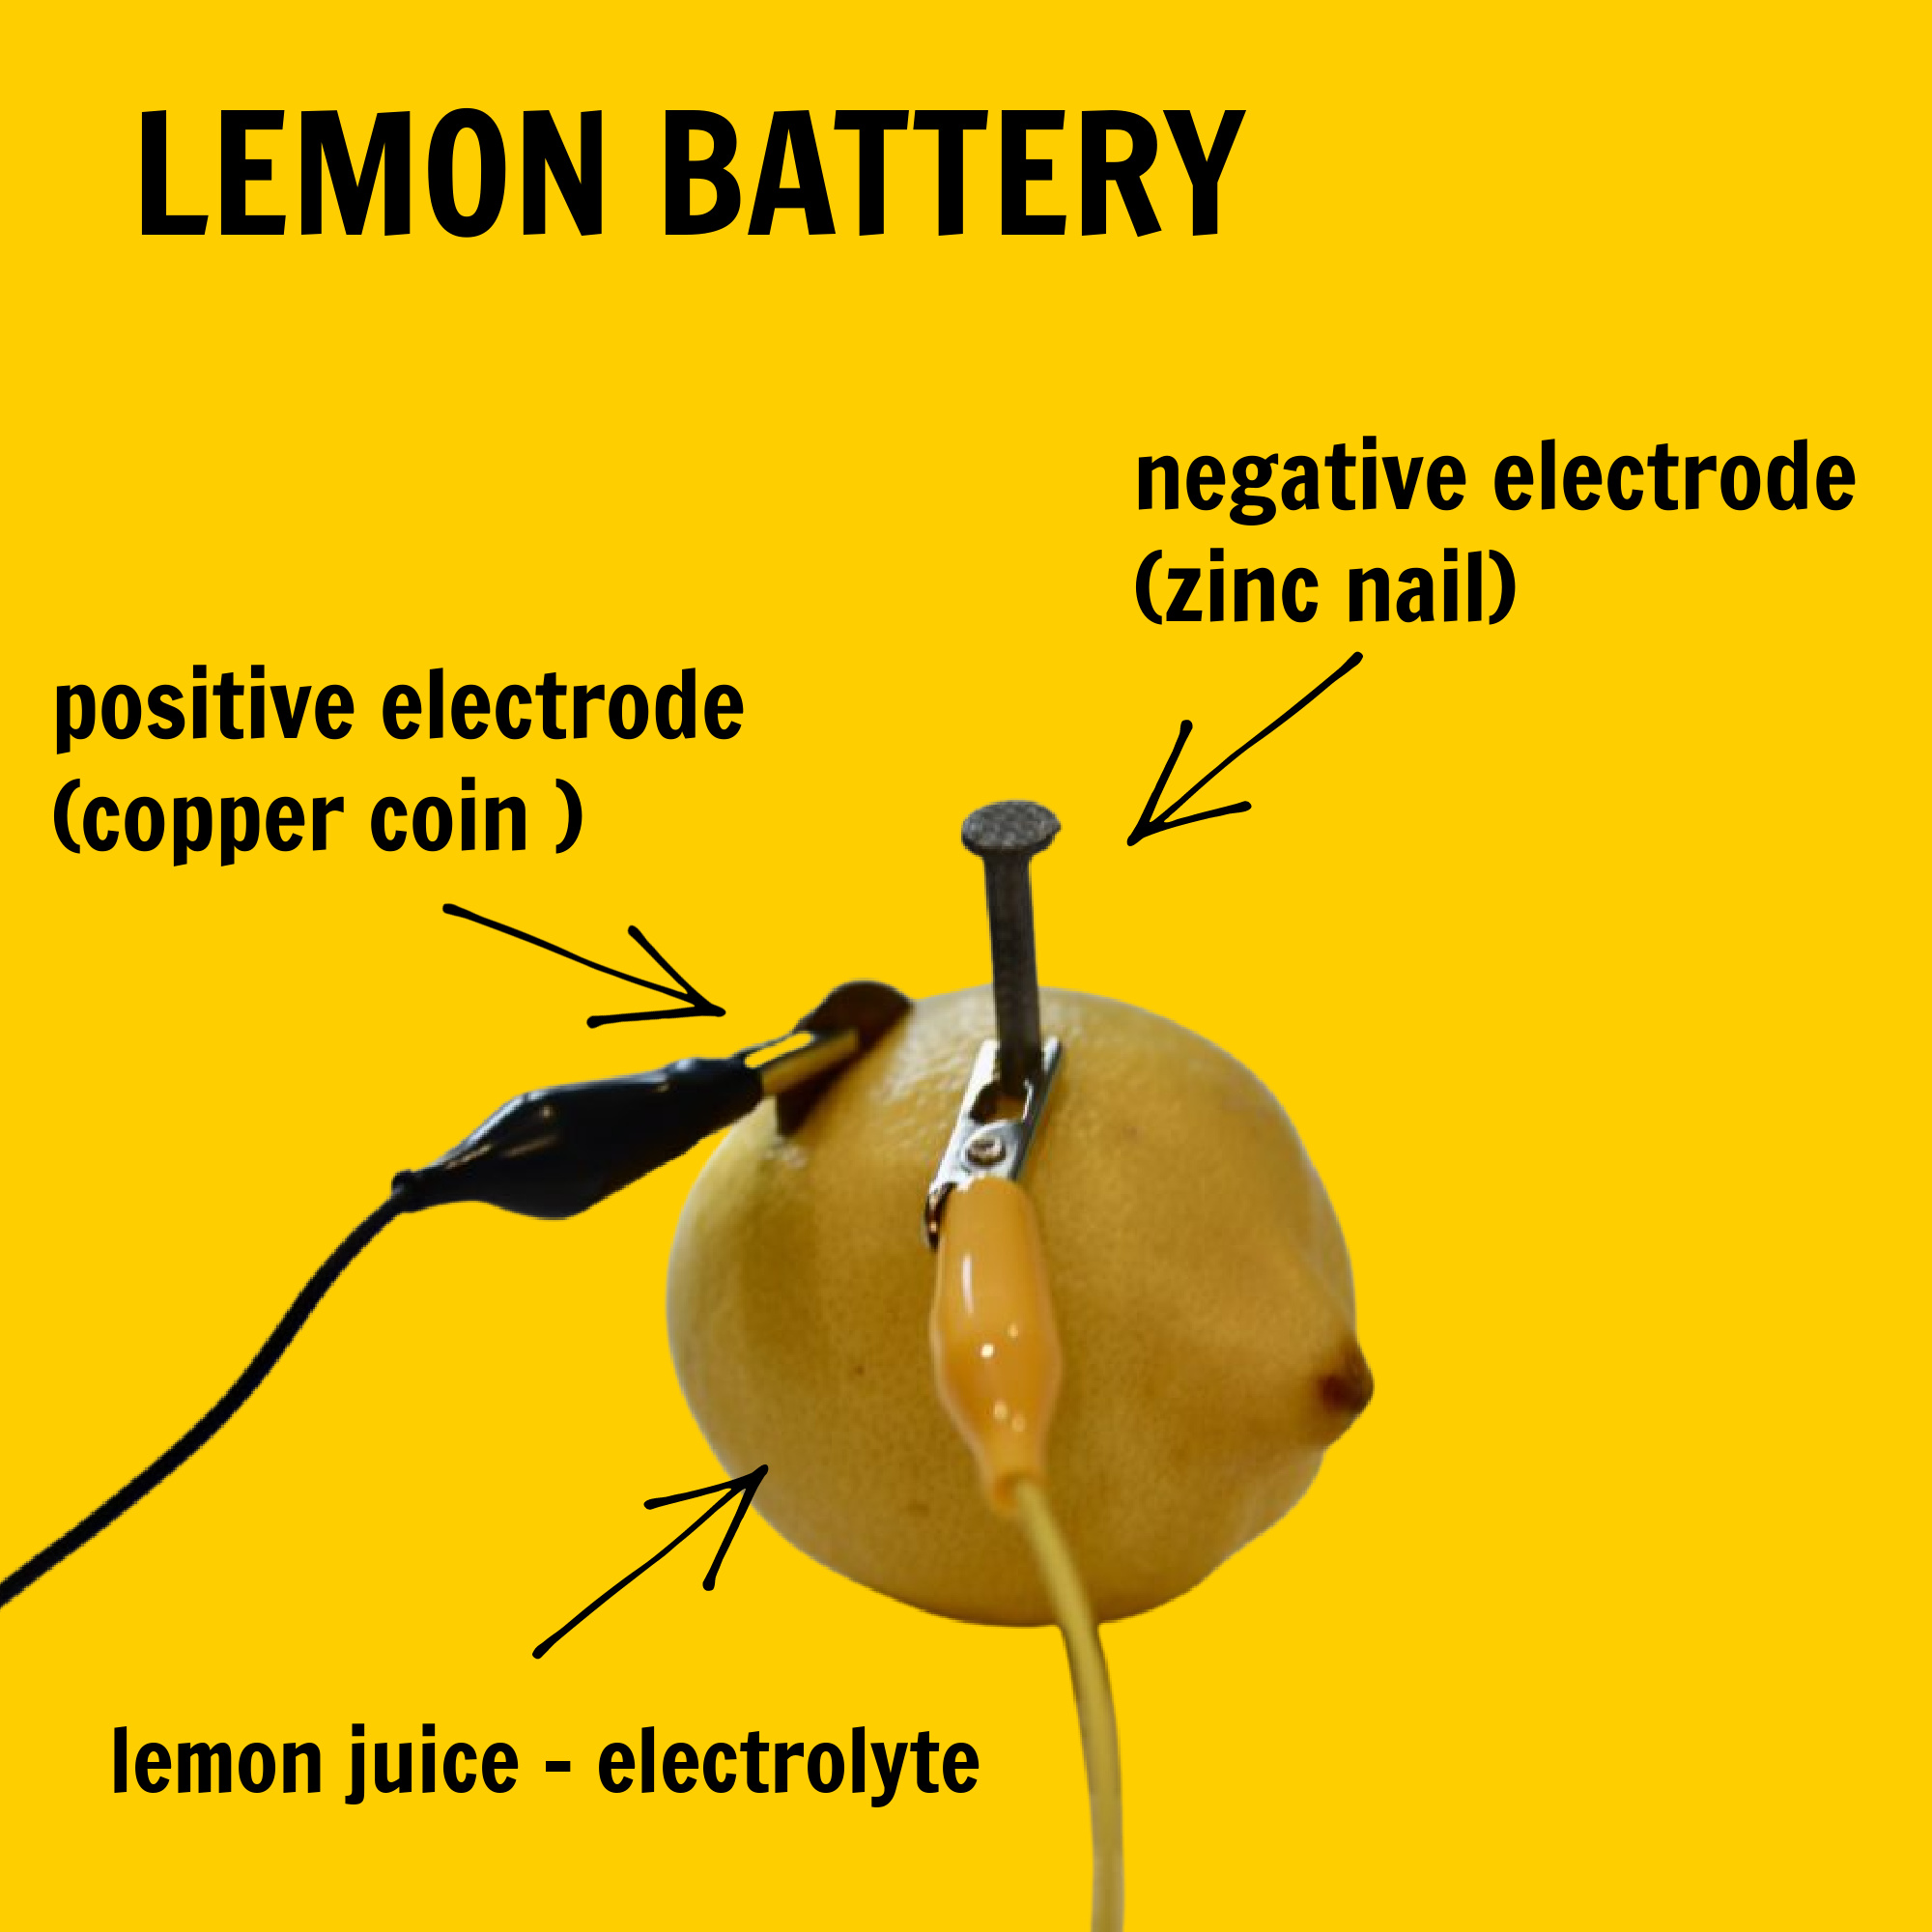 a lemon battery made with a zinc nail and a copper coin